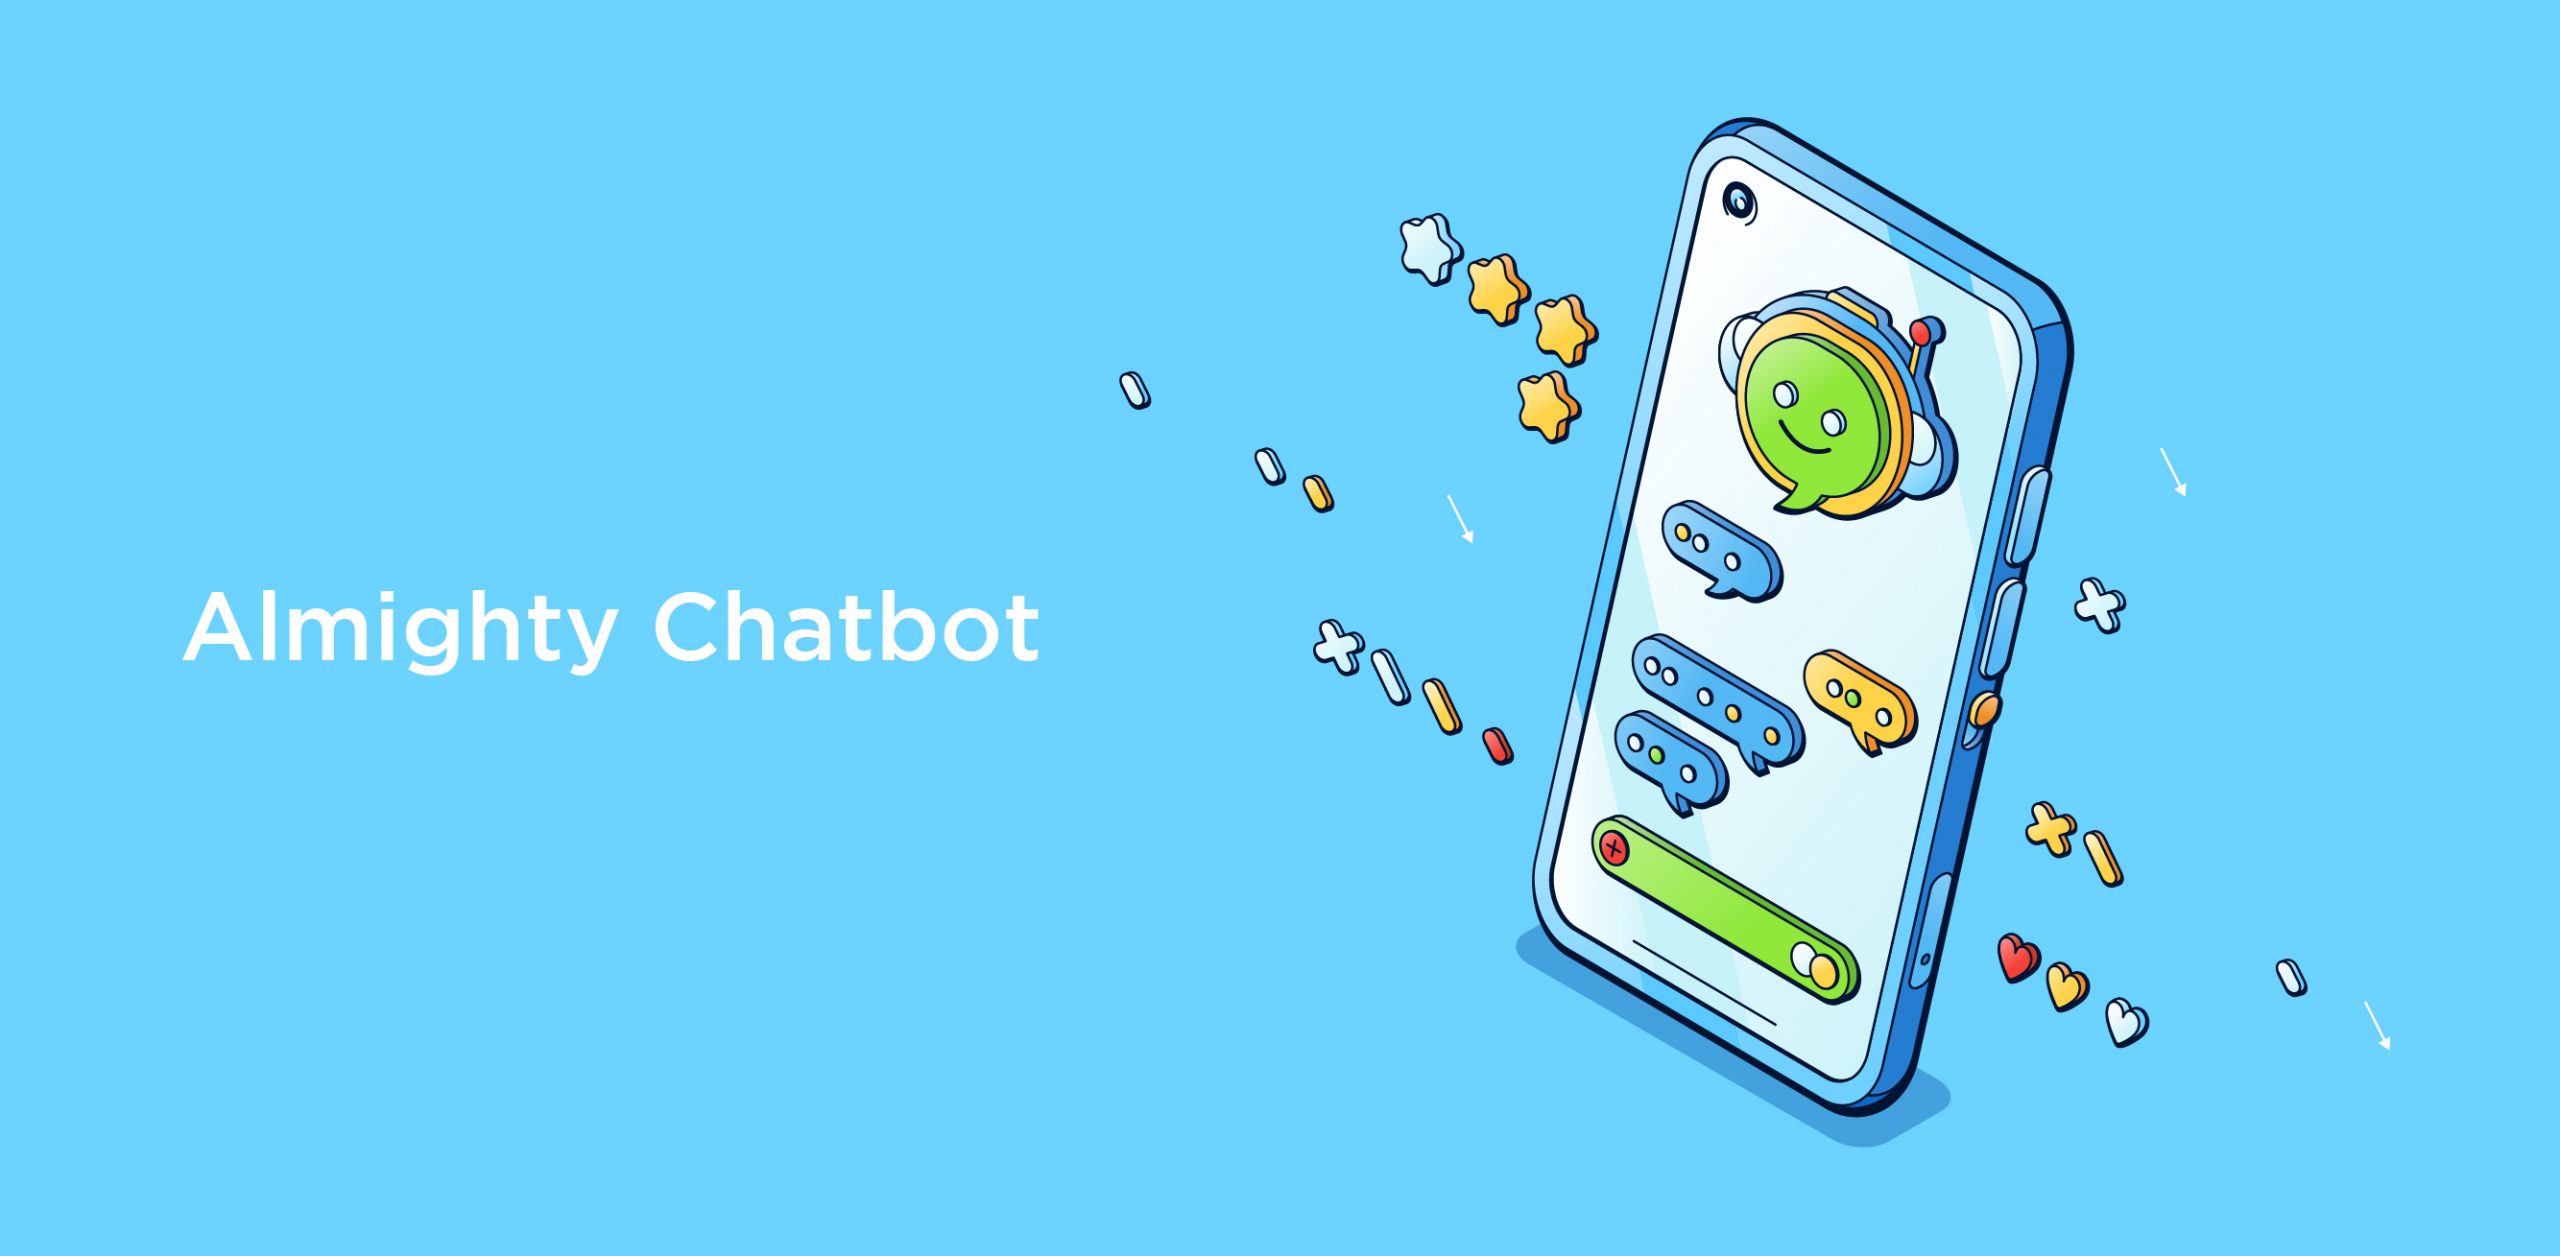 Almighty Chatbot